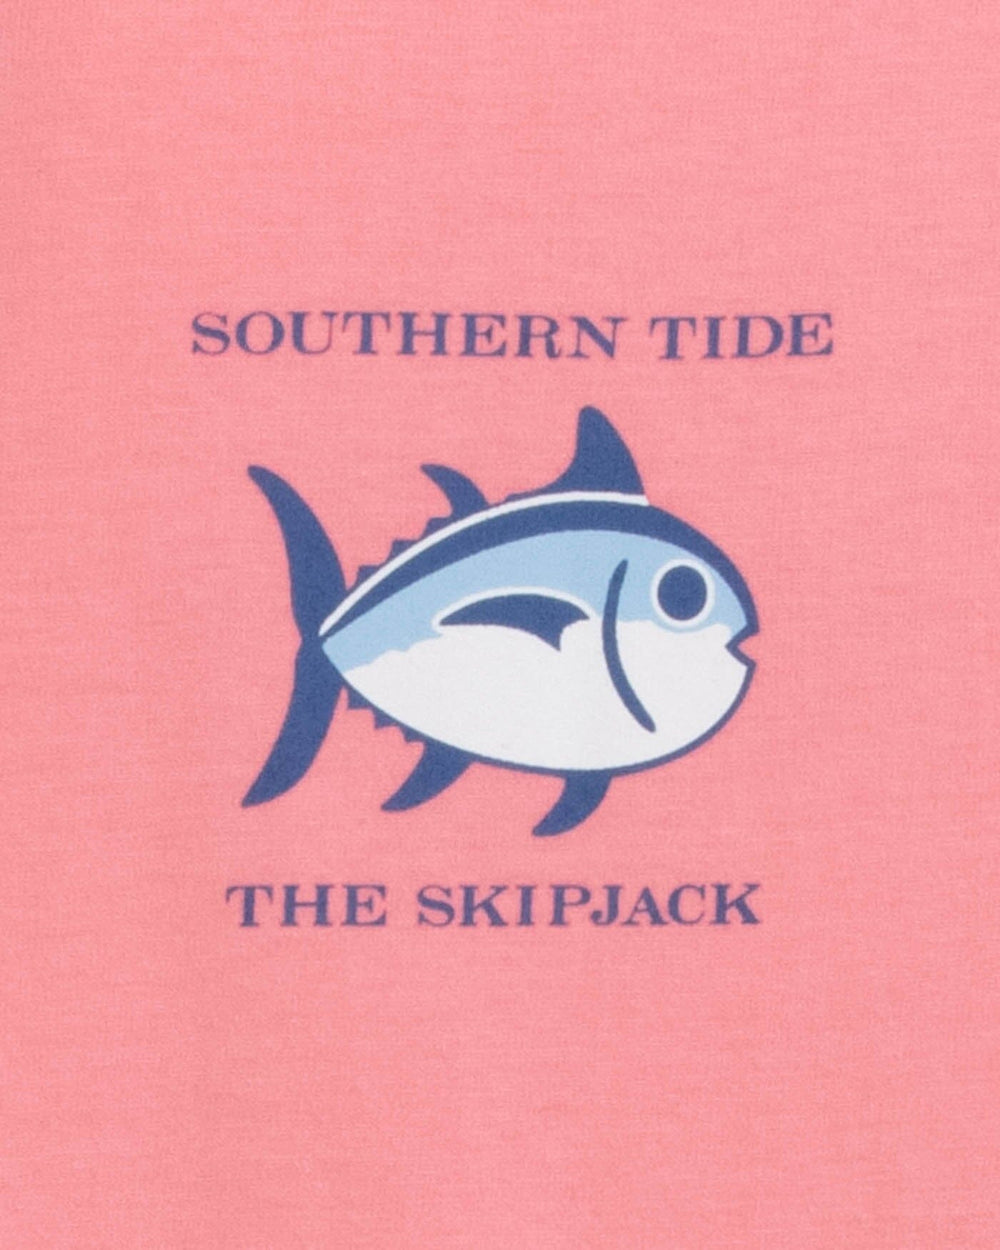 The detail view of the Southern Tide Long Sleeve Original Skipjack T-shirt by Southern Tide - Geranium Pink